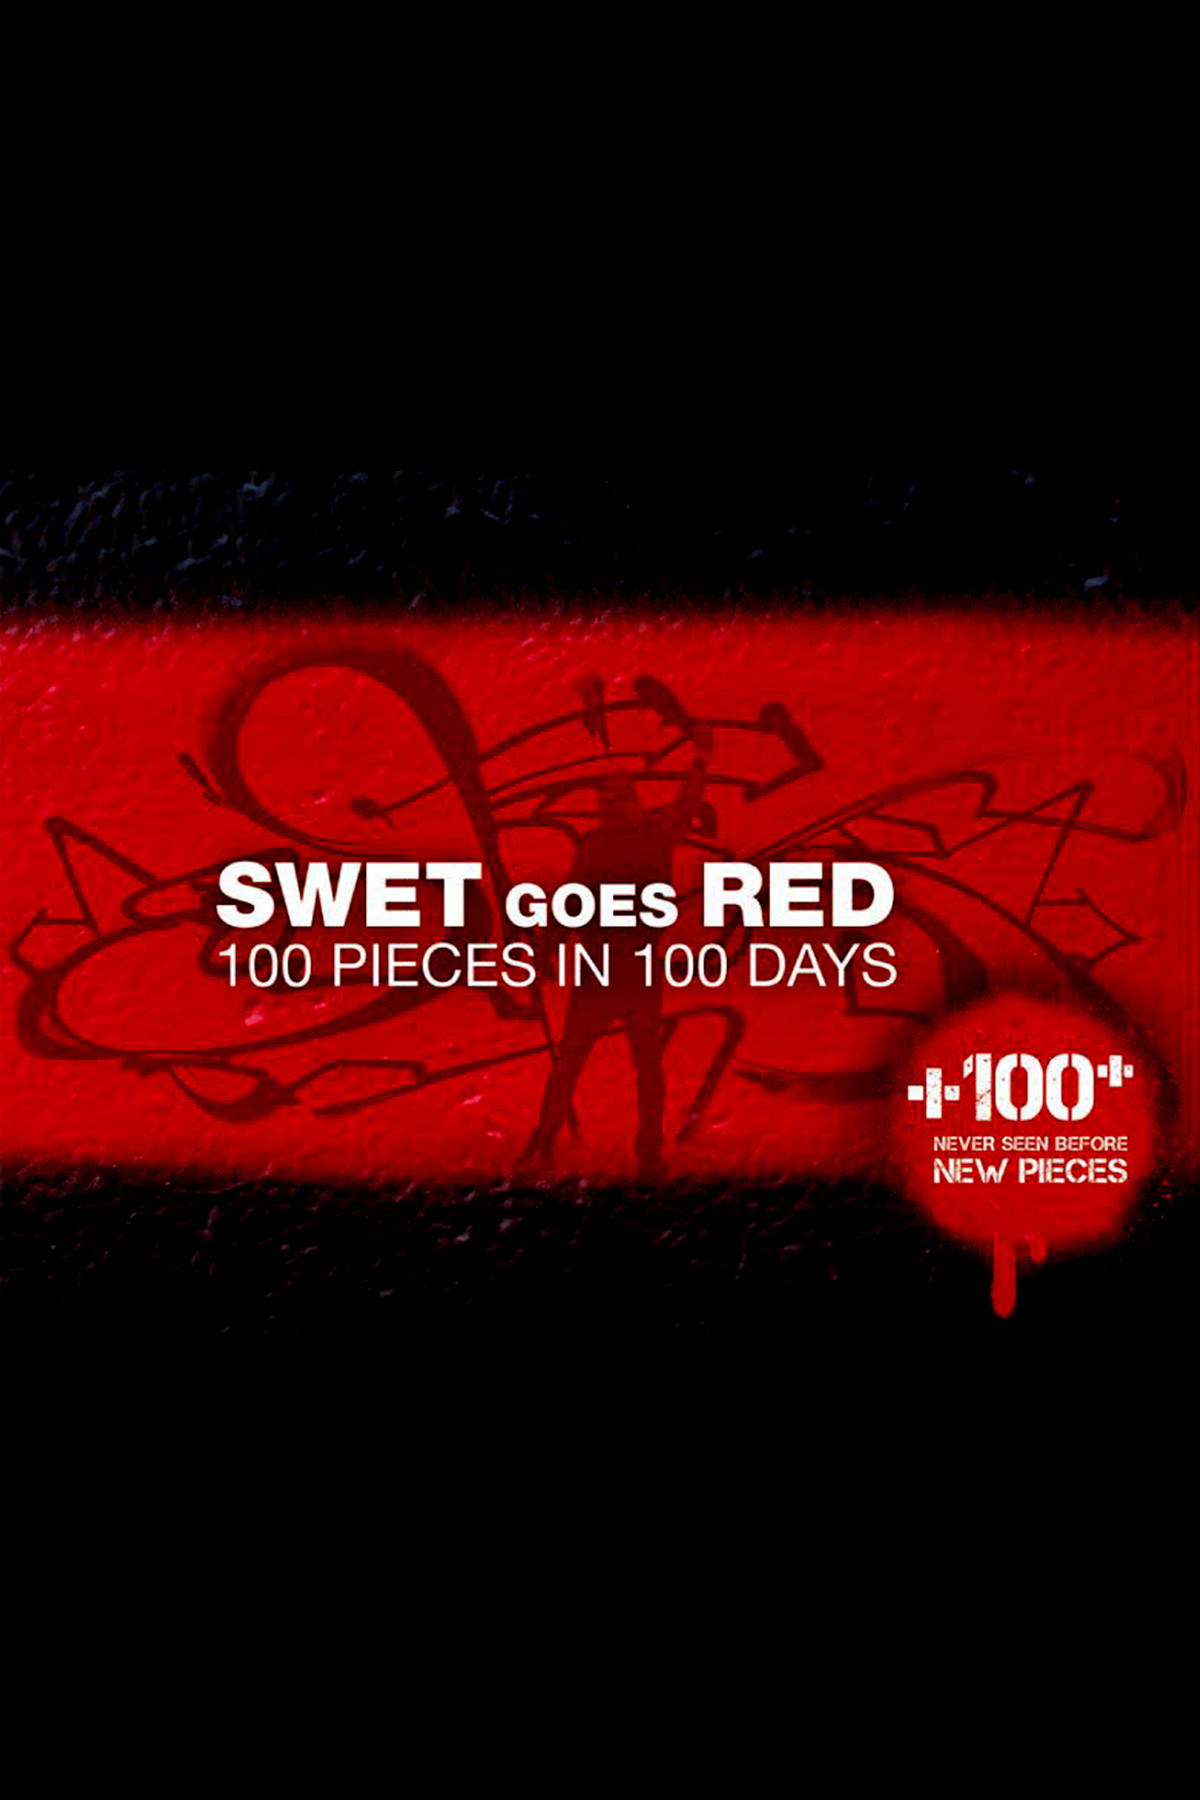 SWET GOES RED